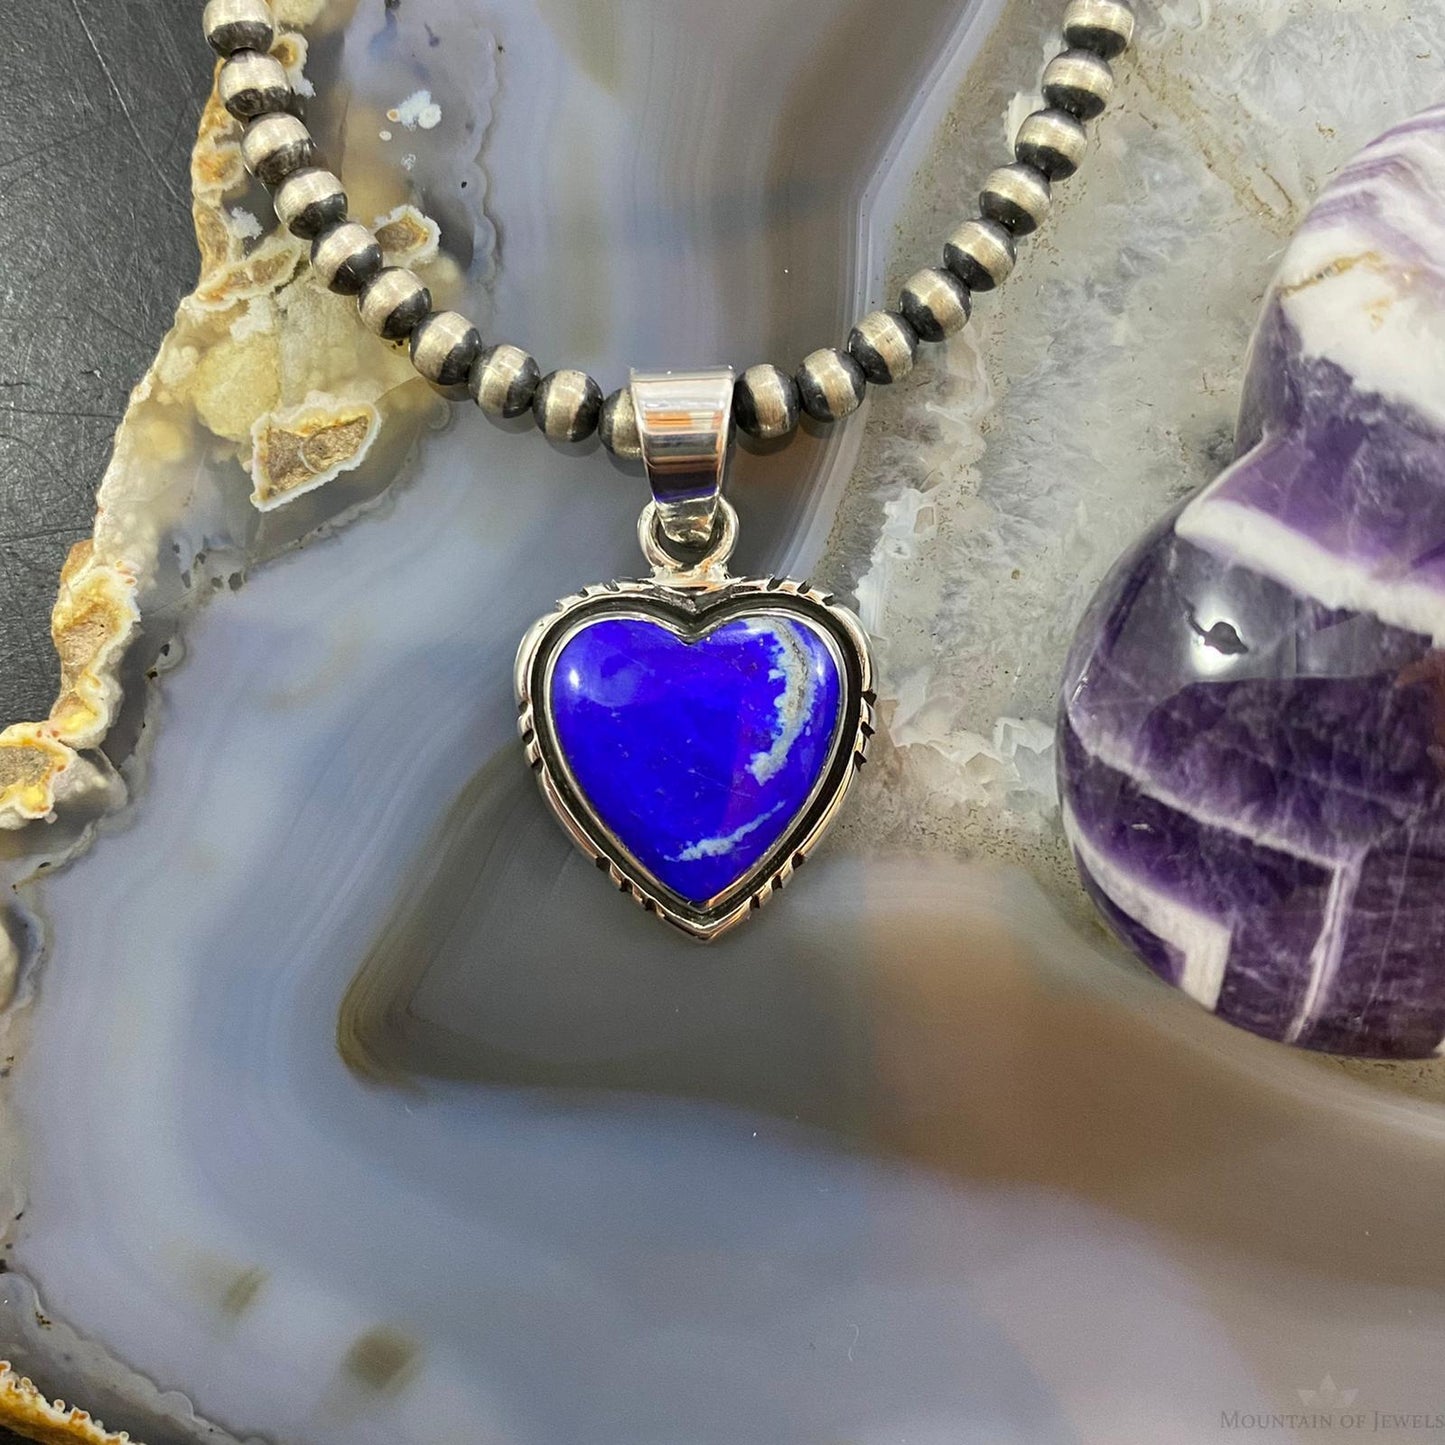 Native American Sterling Silver Lapis Lazuli Heart Stamped Pendant For Women #3